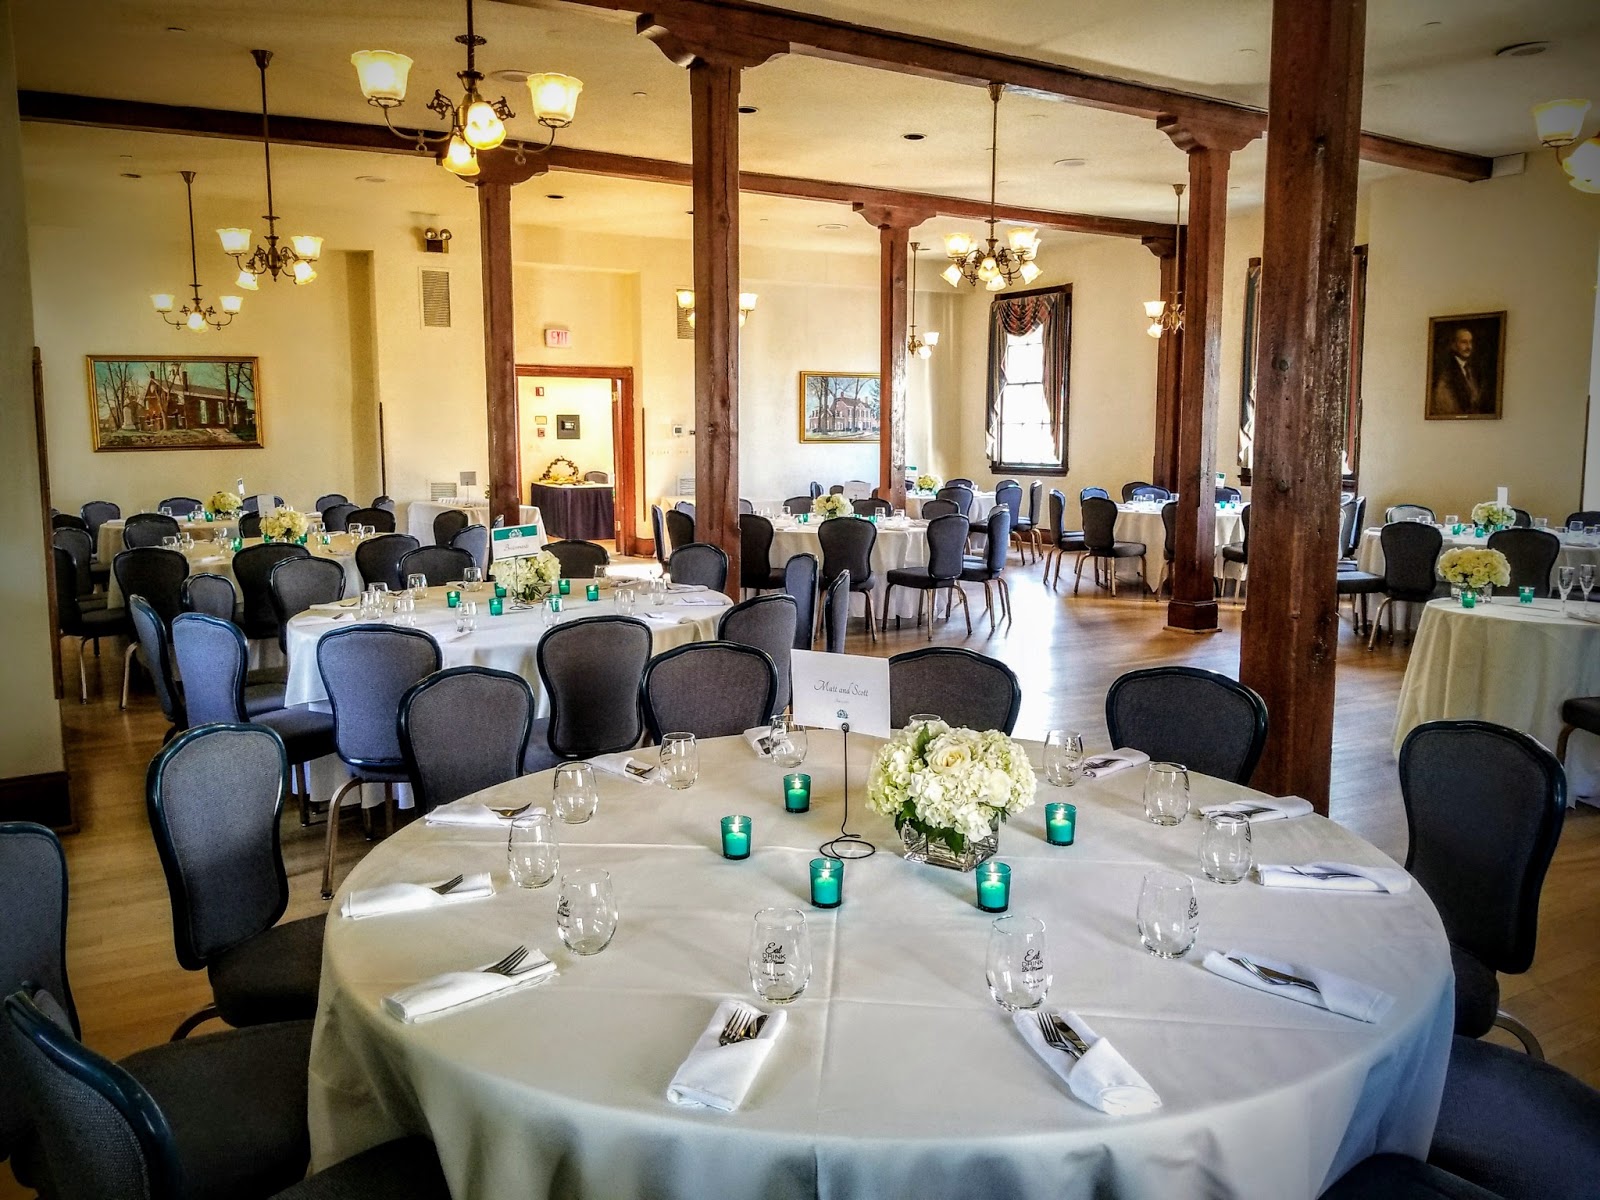  Wedding  Catering  at Old Town Hall  Fairfax  VA  Northern 